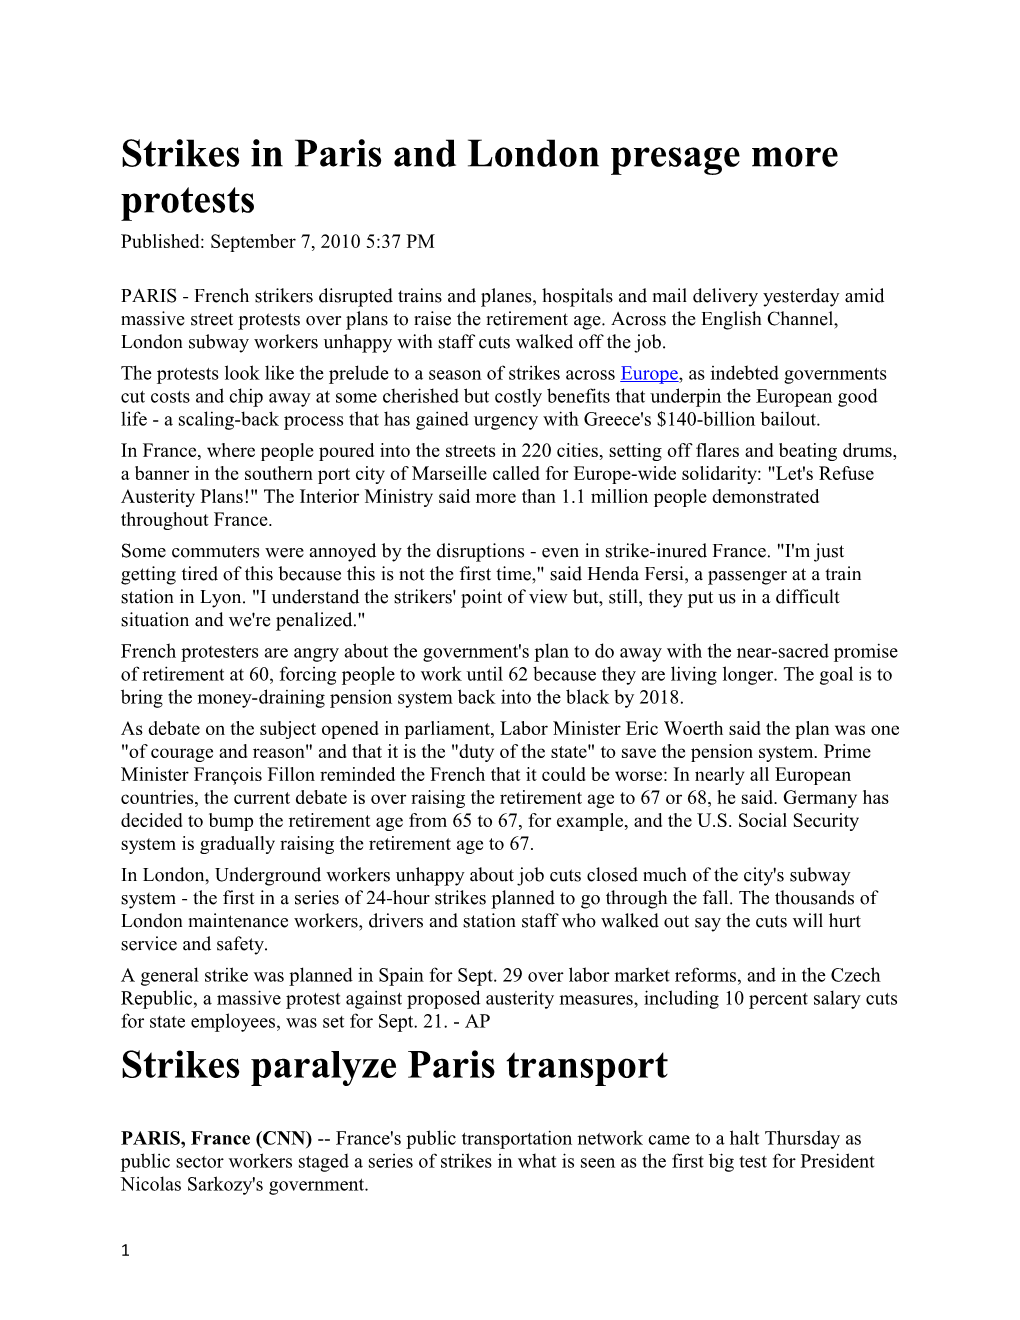 Strikes in Paris and London Presage More Protests